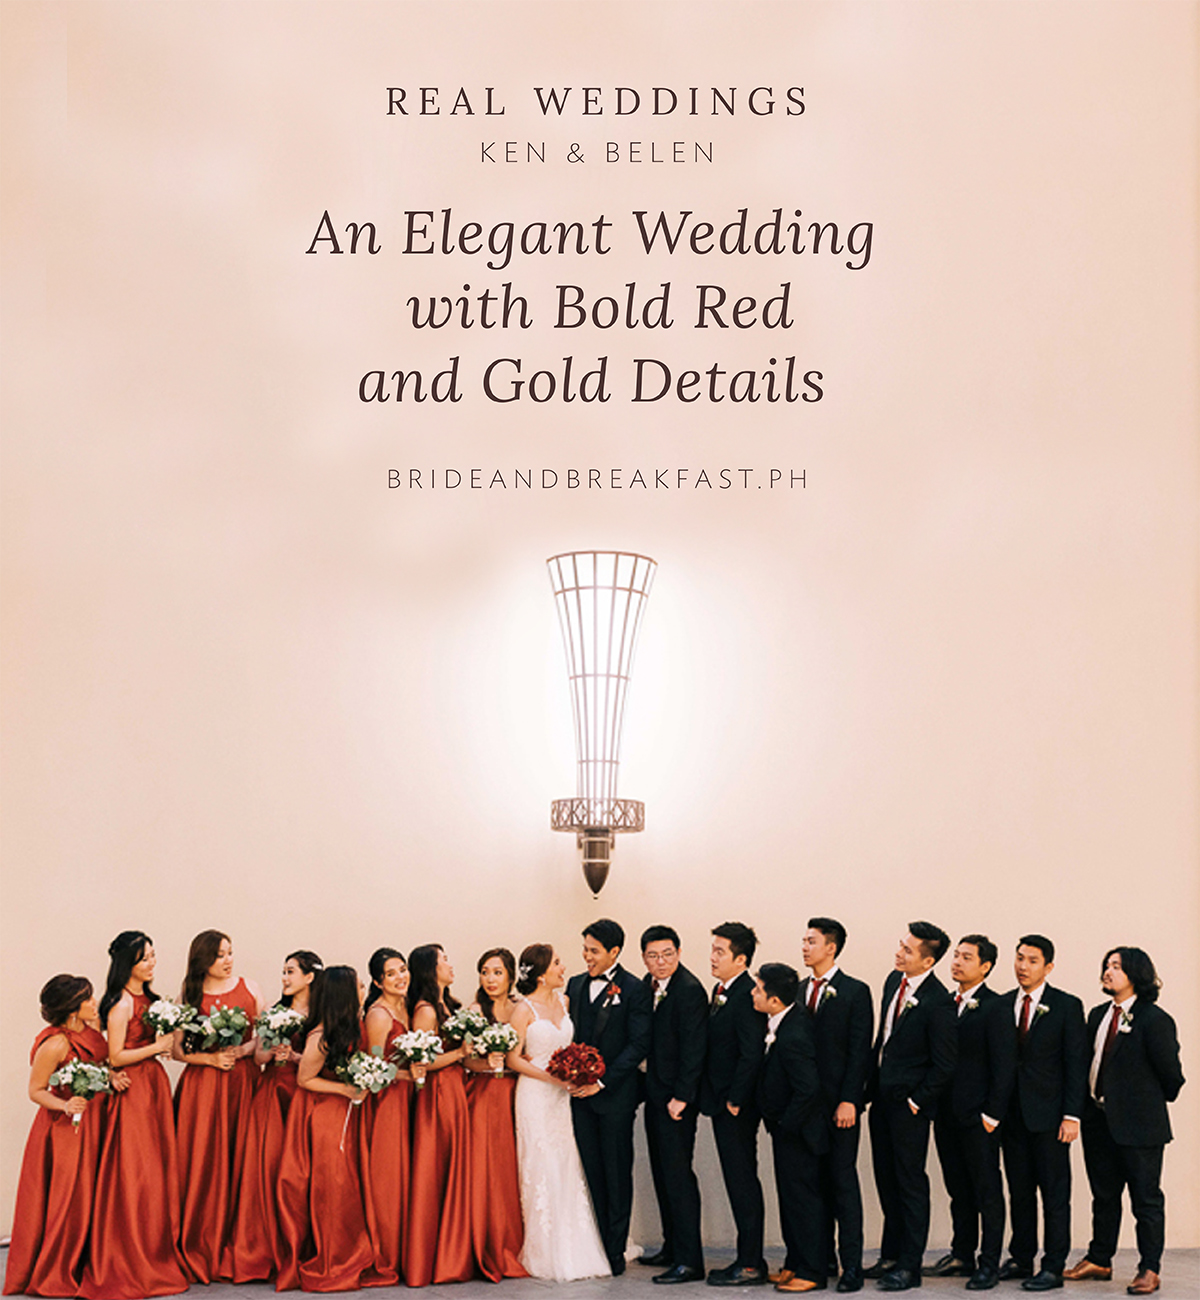 An Elegant Wedding with Bold Red and Gold Details